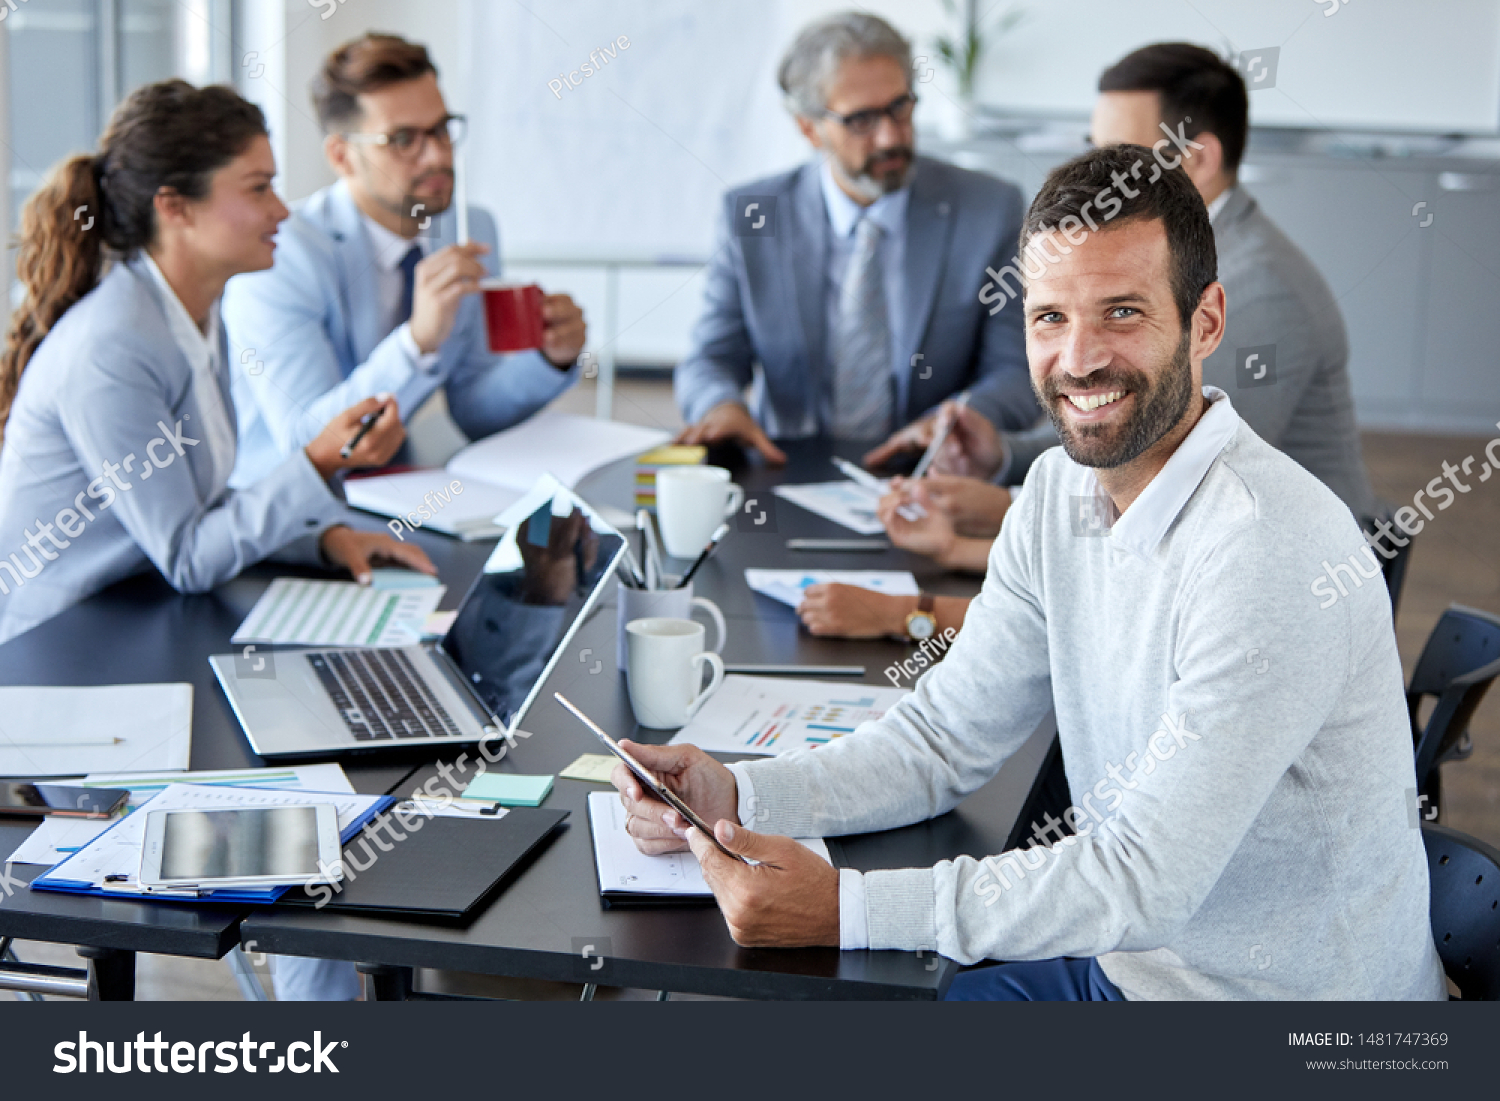 A portrait of a young smiling businessman  a meeting and presentation in the office. Business concept #1481747369